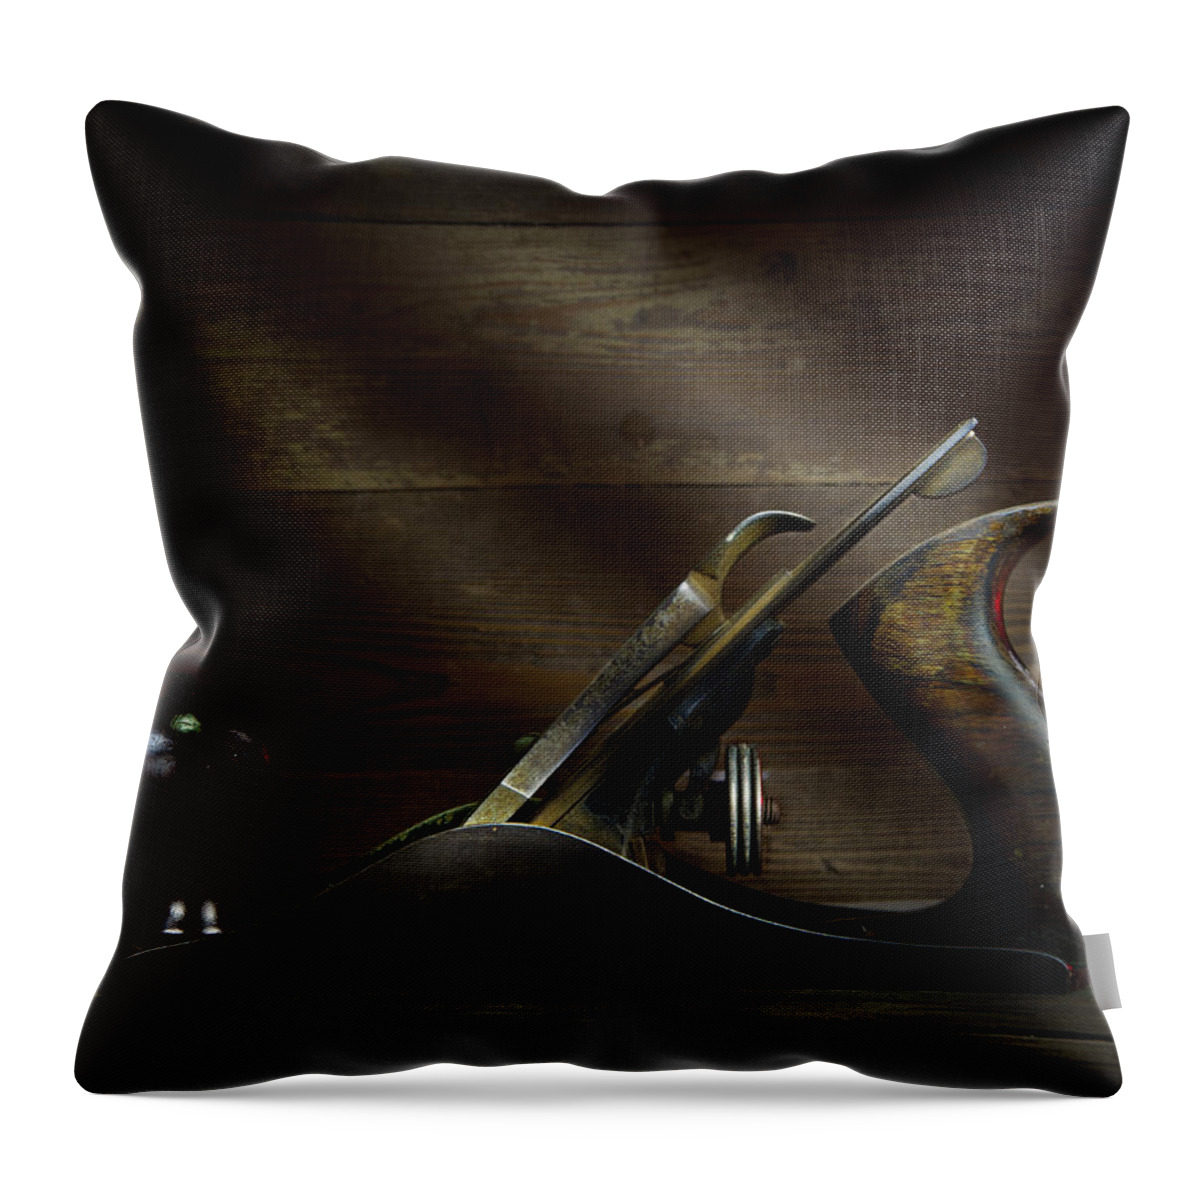 Colour Throw Pillow featuring the photograph Woodworking Plane by Ian Barber